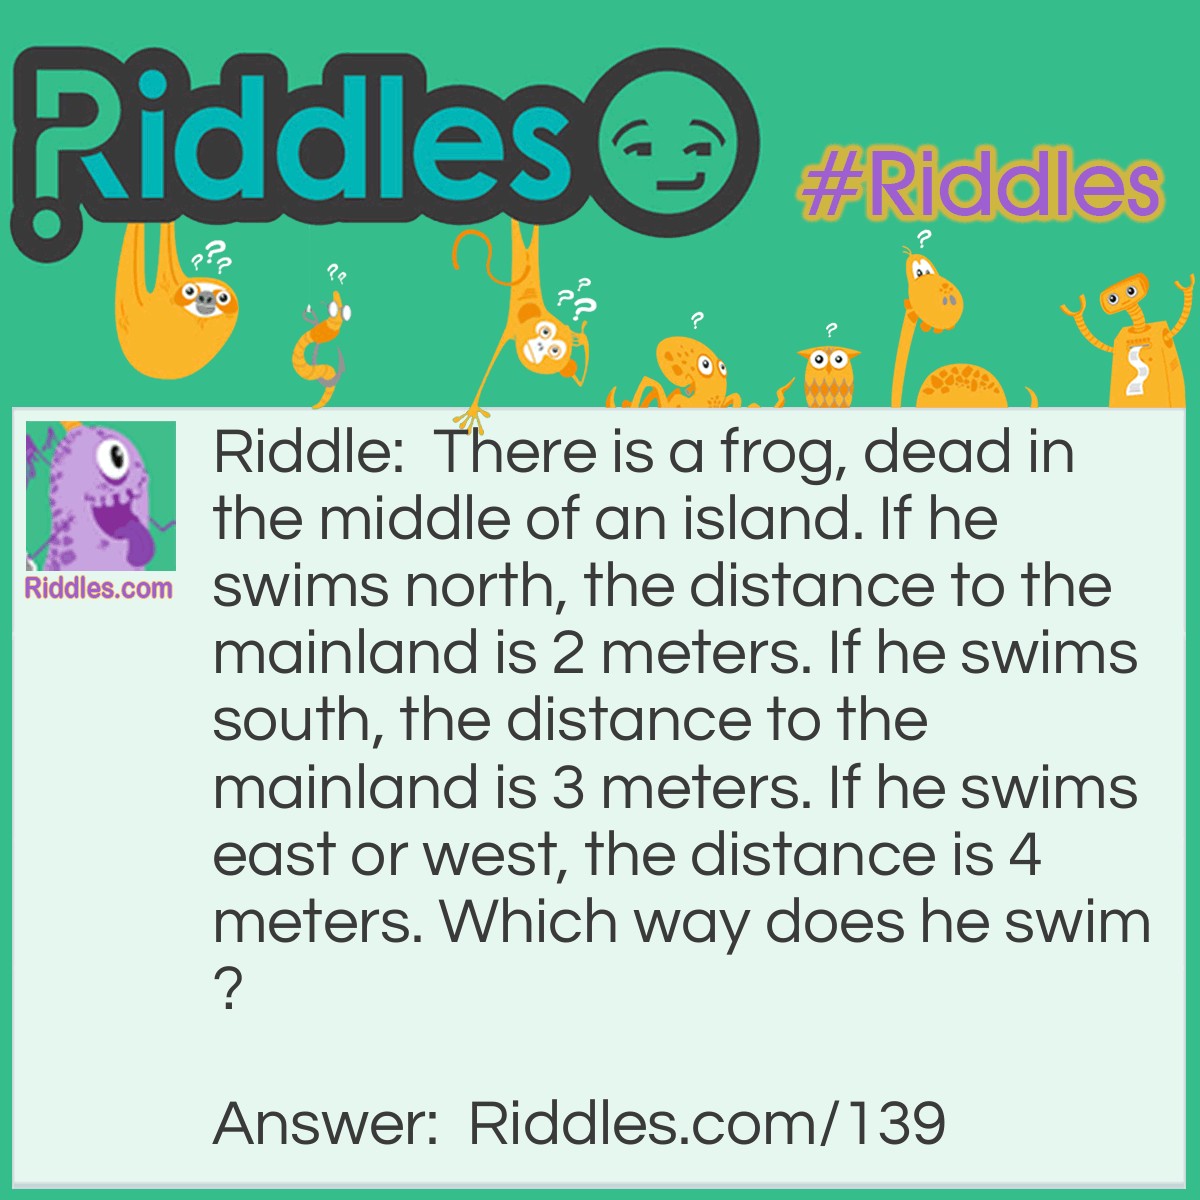 Riddle: There is a frog, dead in the middle of an island. If he swims north, the distance to the mainland is 2 meters. If he swims south, the distance to the mainland is 3 meters. If he swims east or west, the distance is 4 meters. Which way does he swim? Answer: He doesn't swim at all, he is dead.